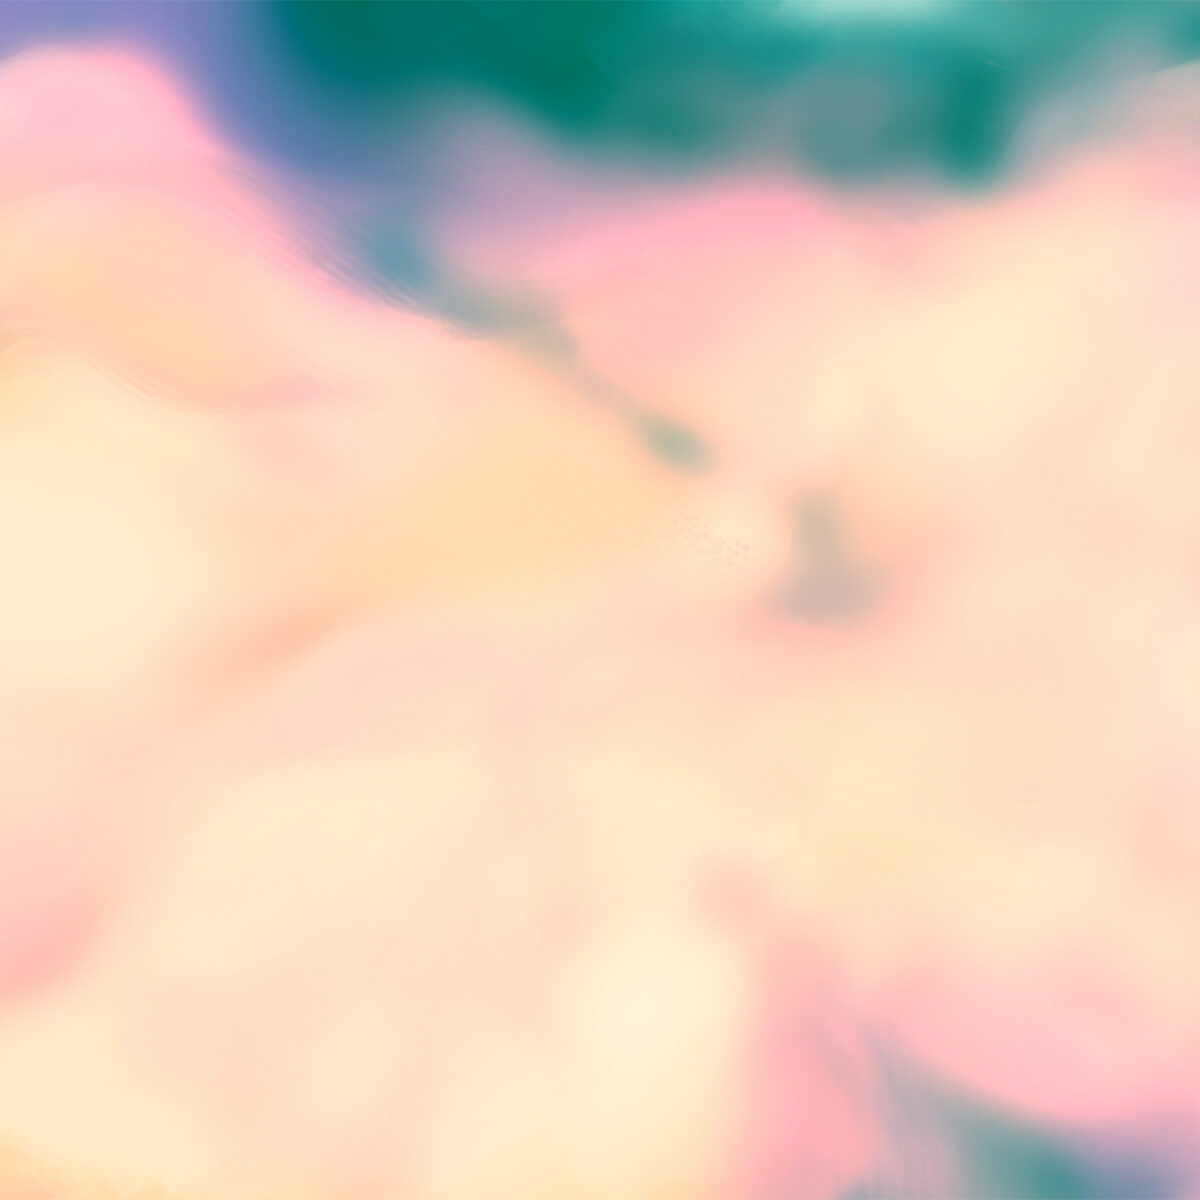 A square image that is mostly an abstract colour field. It is blurry and cloud-like, primarily being bright yellow, orange, pinks in the centre, with purples, dark blues, and greens on the top and bottom fringes.